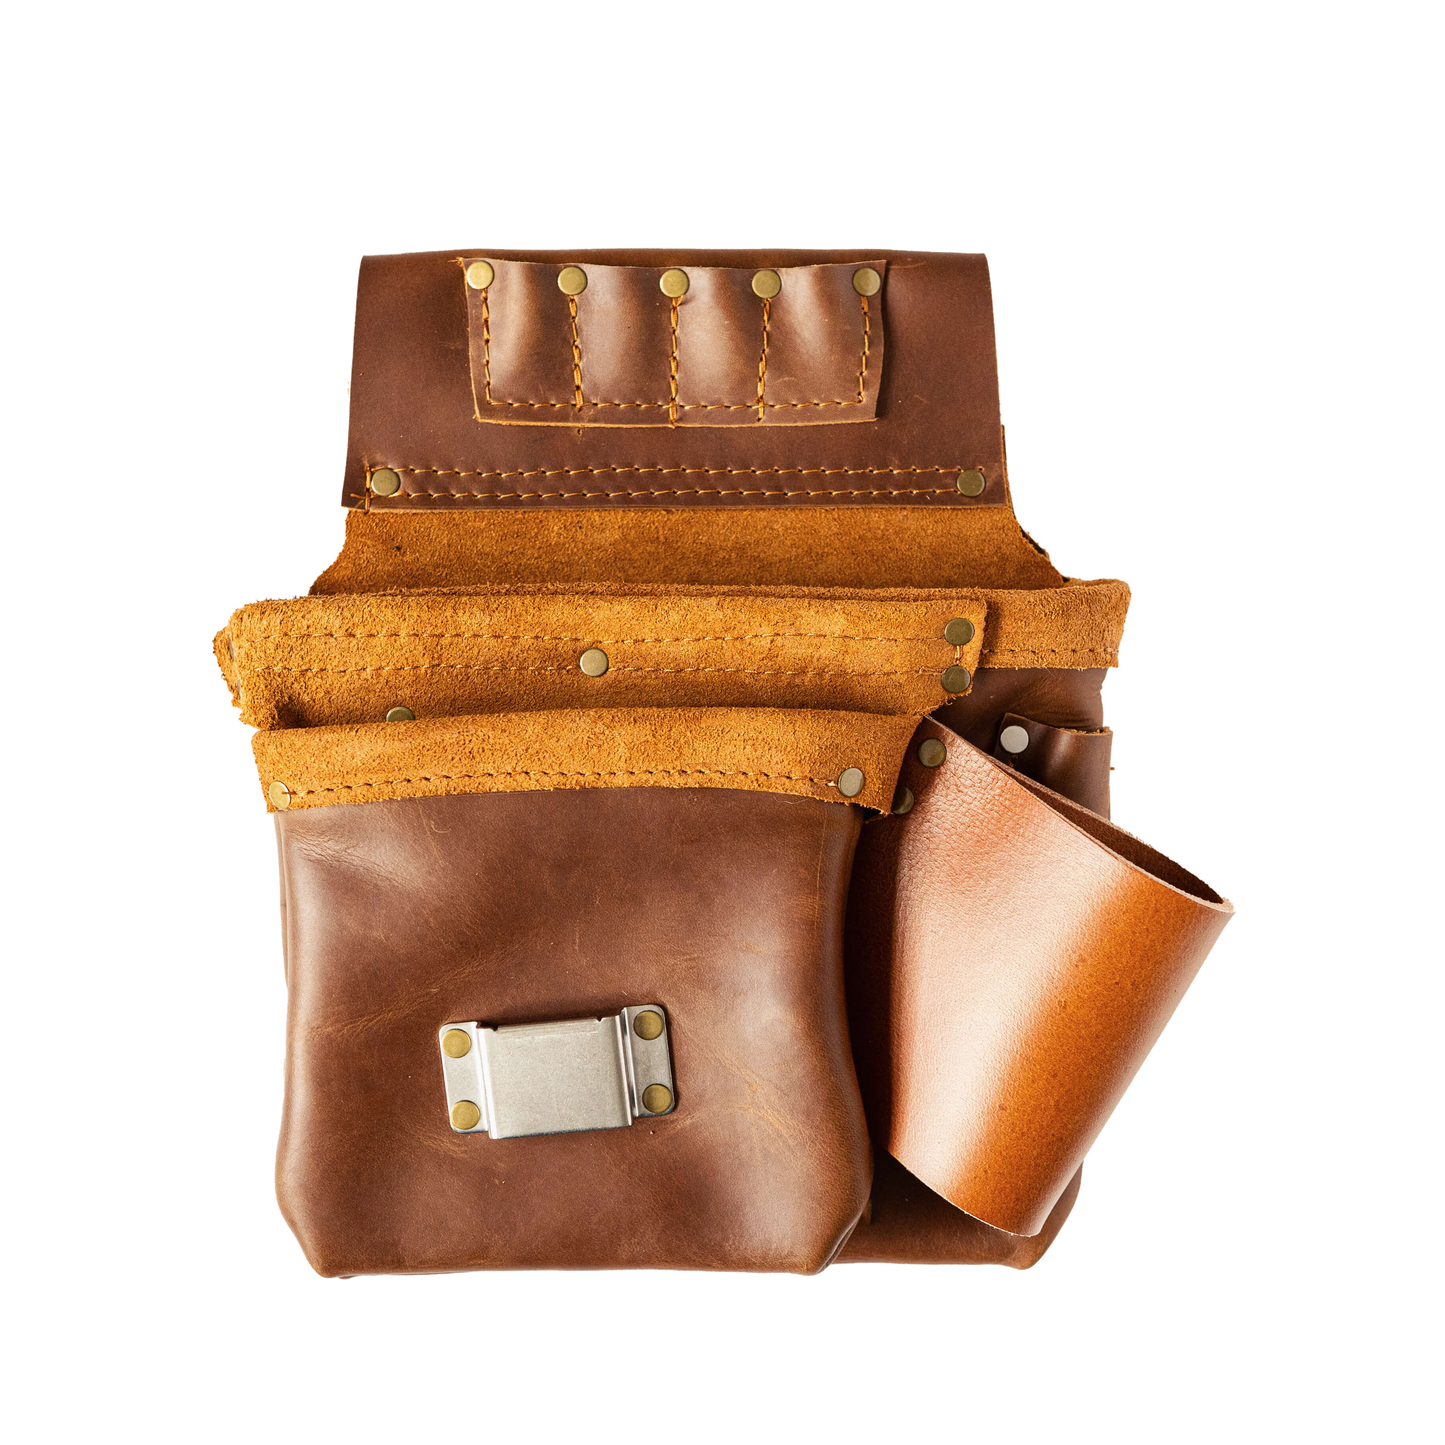 A collection of various Belt Bag 1 from The Durham Leatherworker, crafted by a skilled carpenter, neatly stacked on top of each other, isolated on a white background.